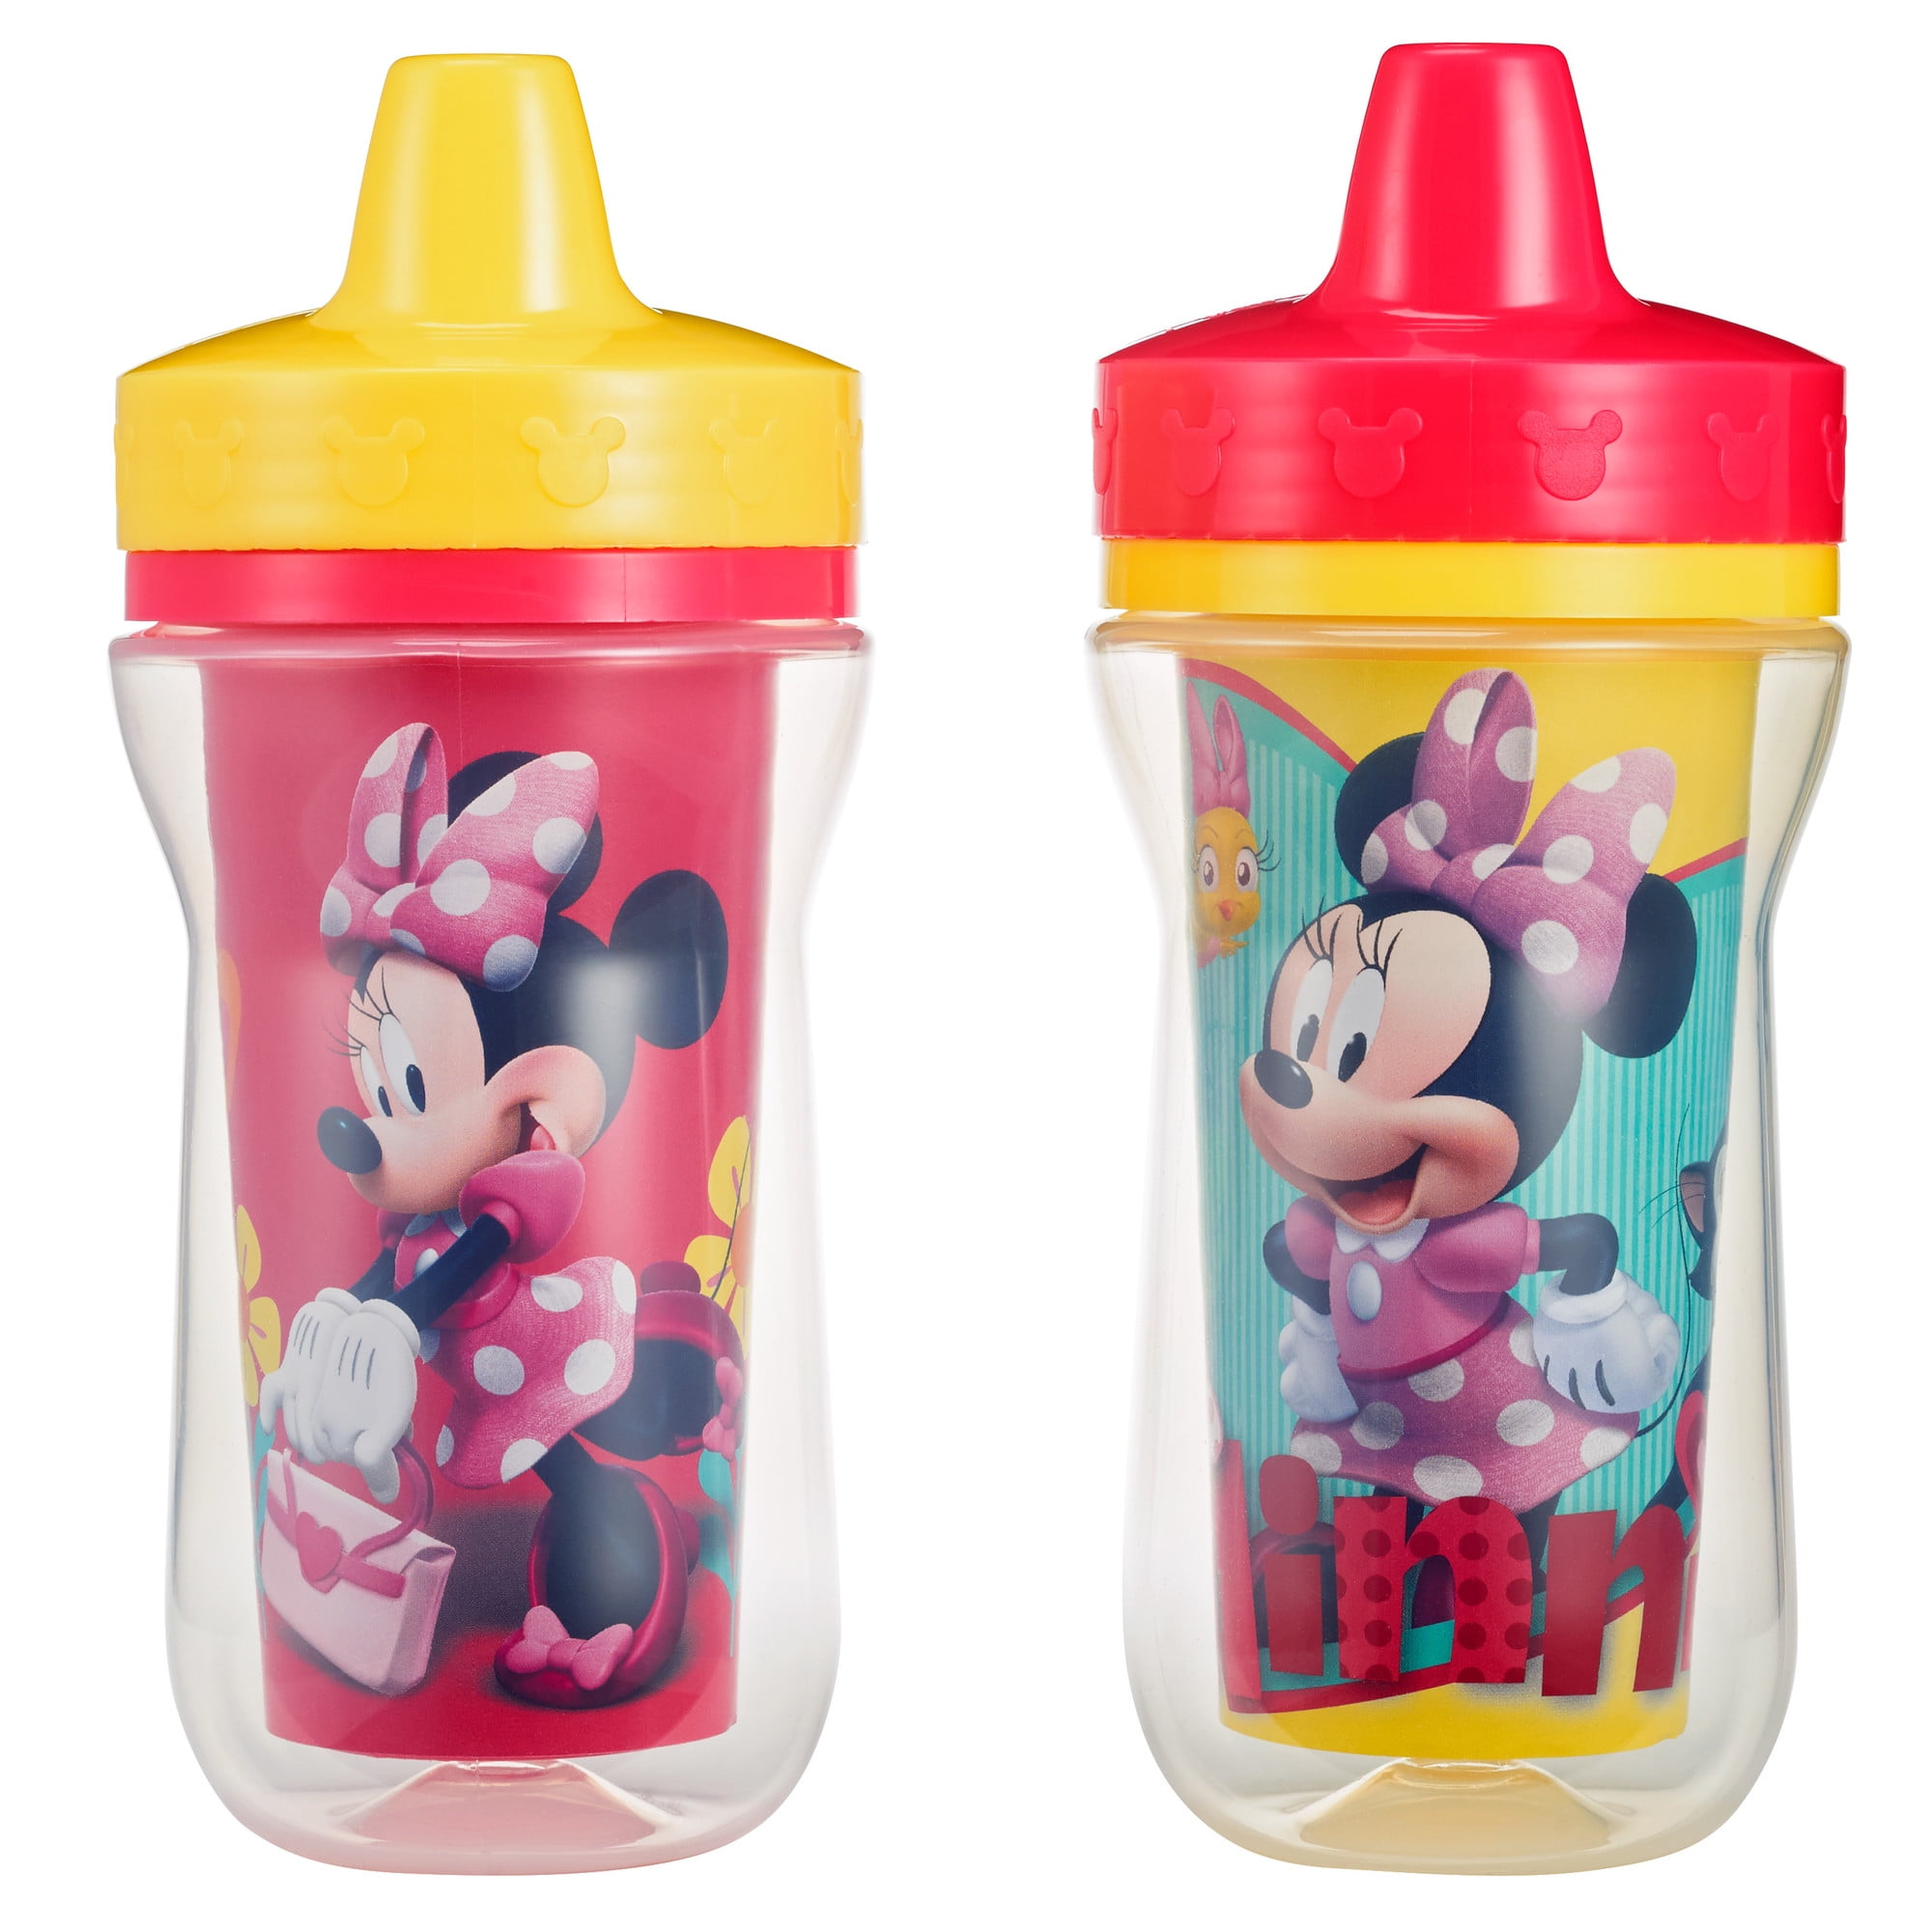 Tomy The First Years 9oz Unspillable Cup For Kids, Mickey Mouse